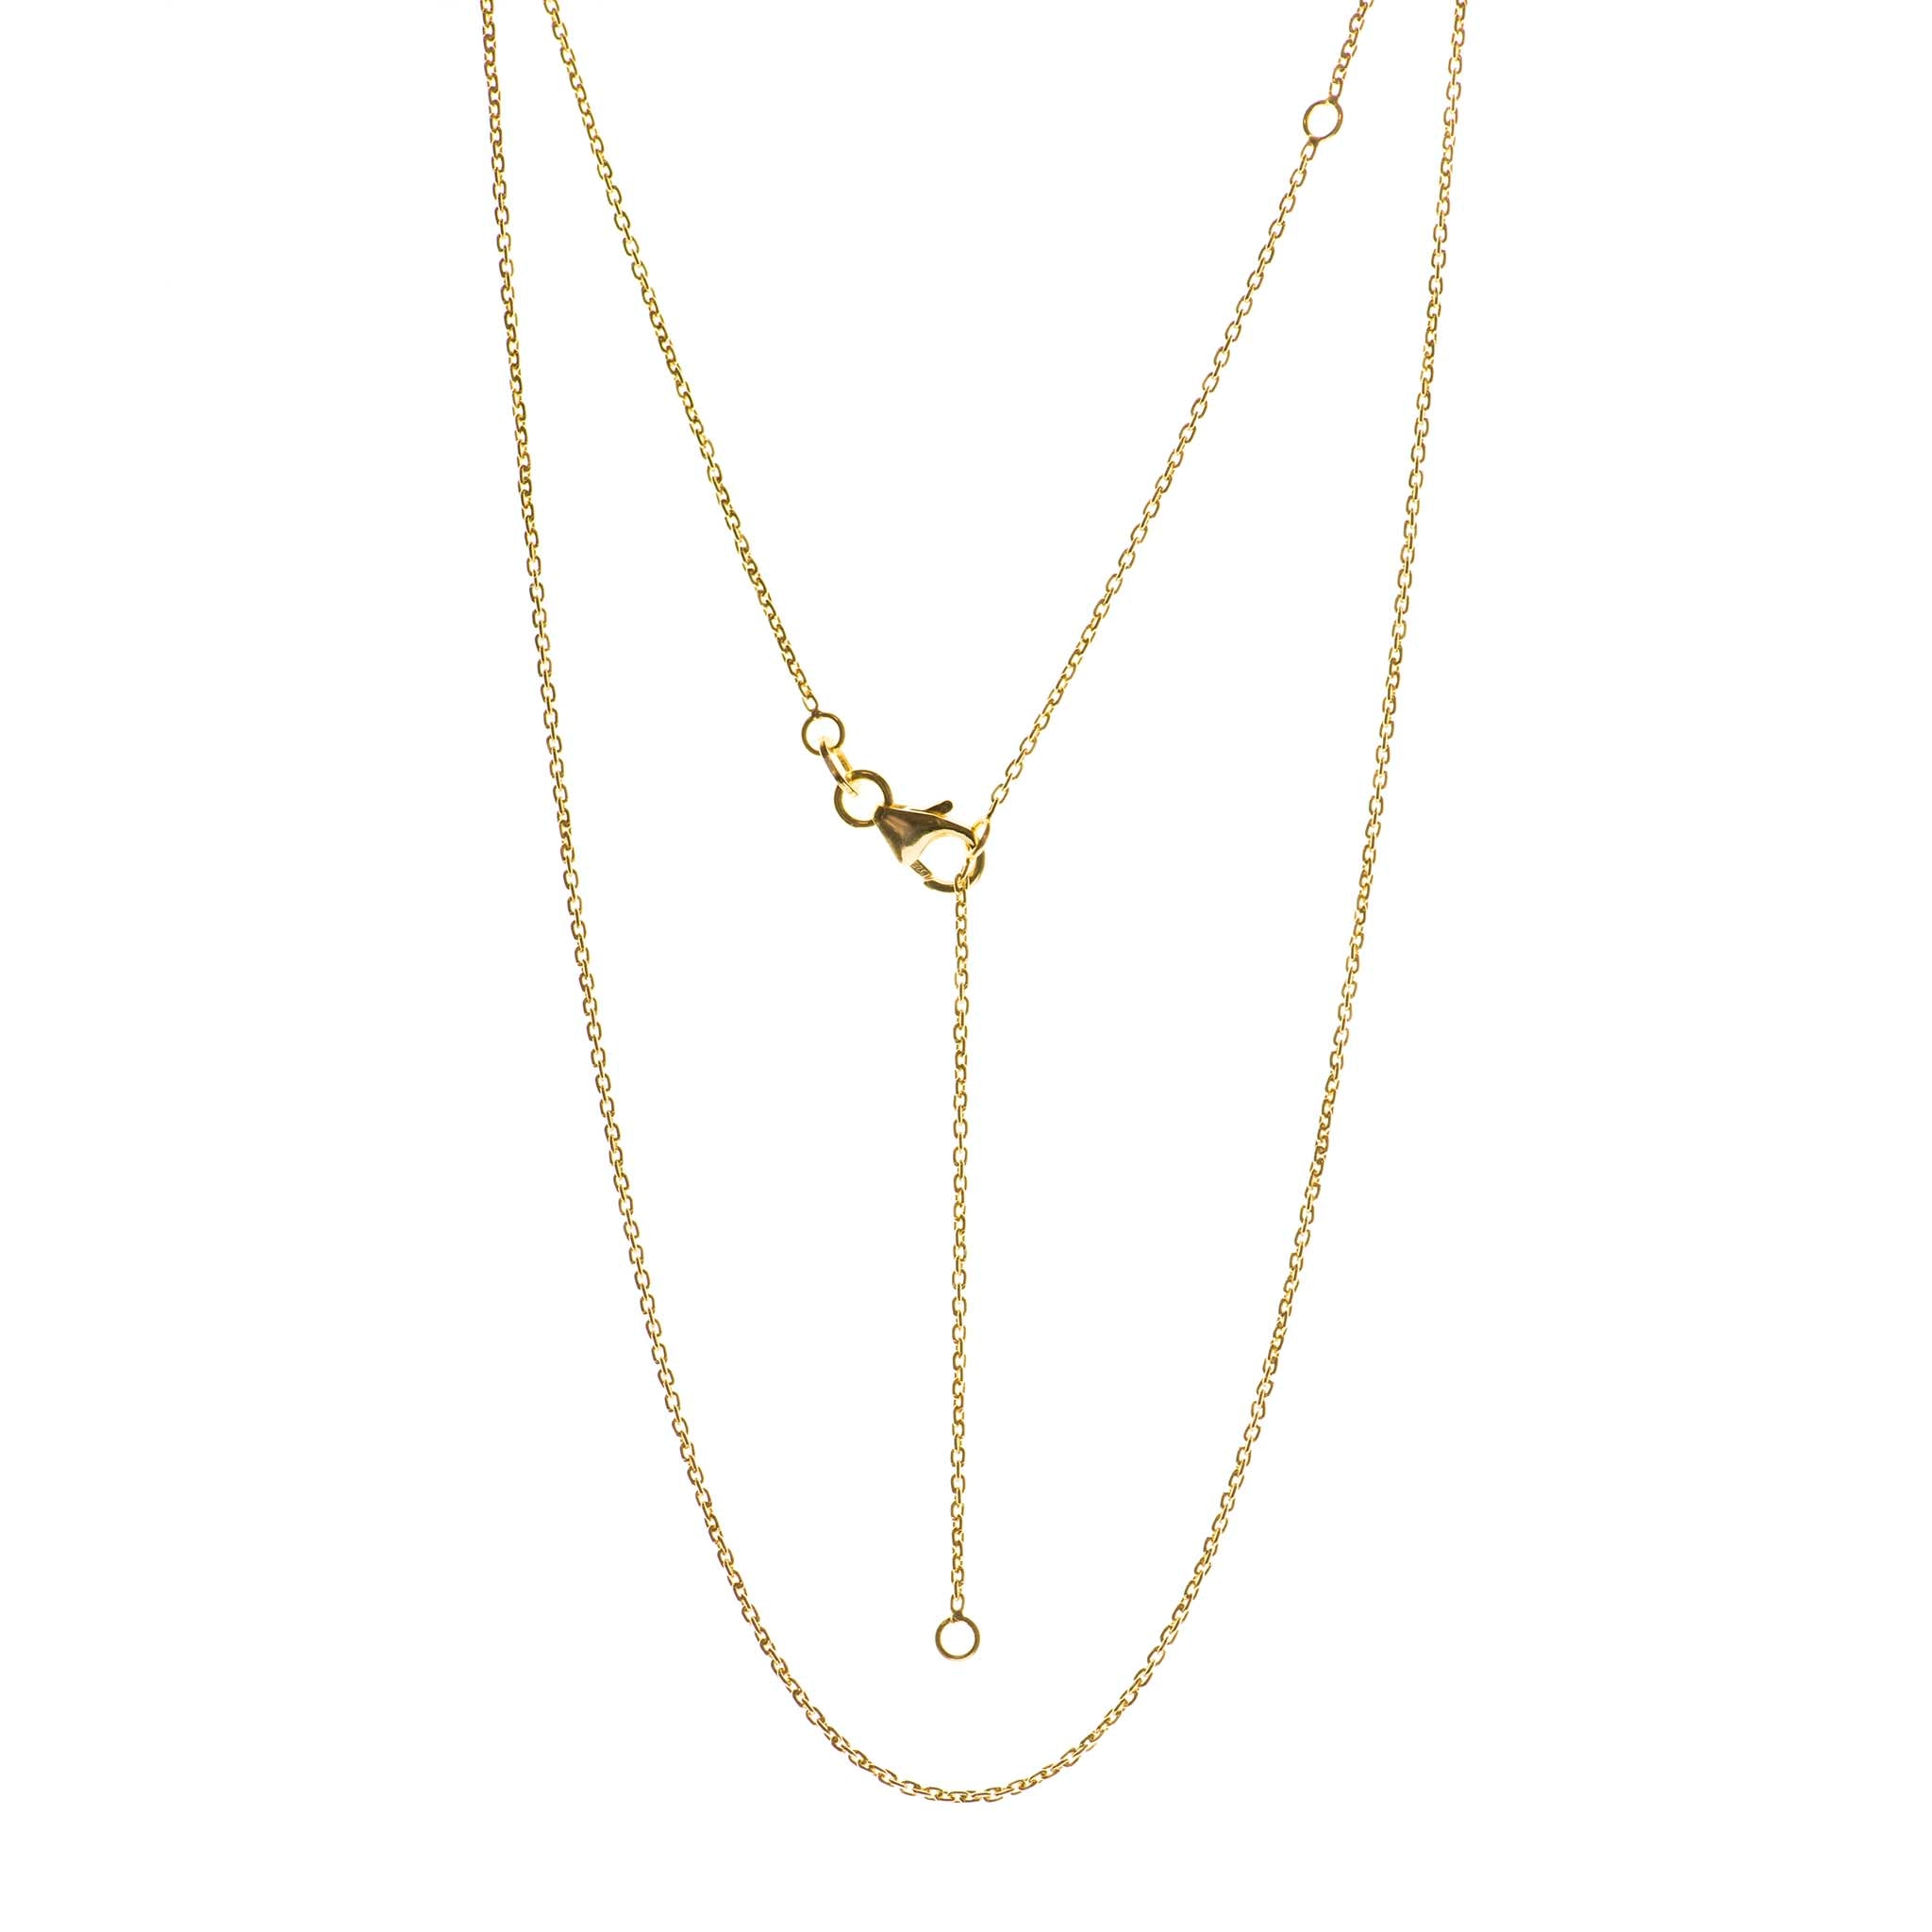 Yellow gold adjustable 16-20 Inch chain